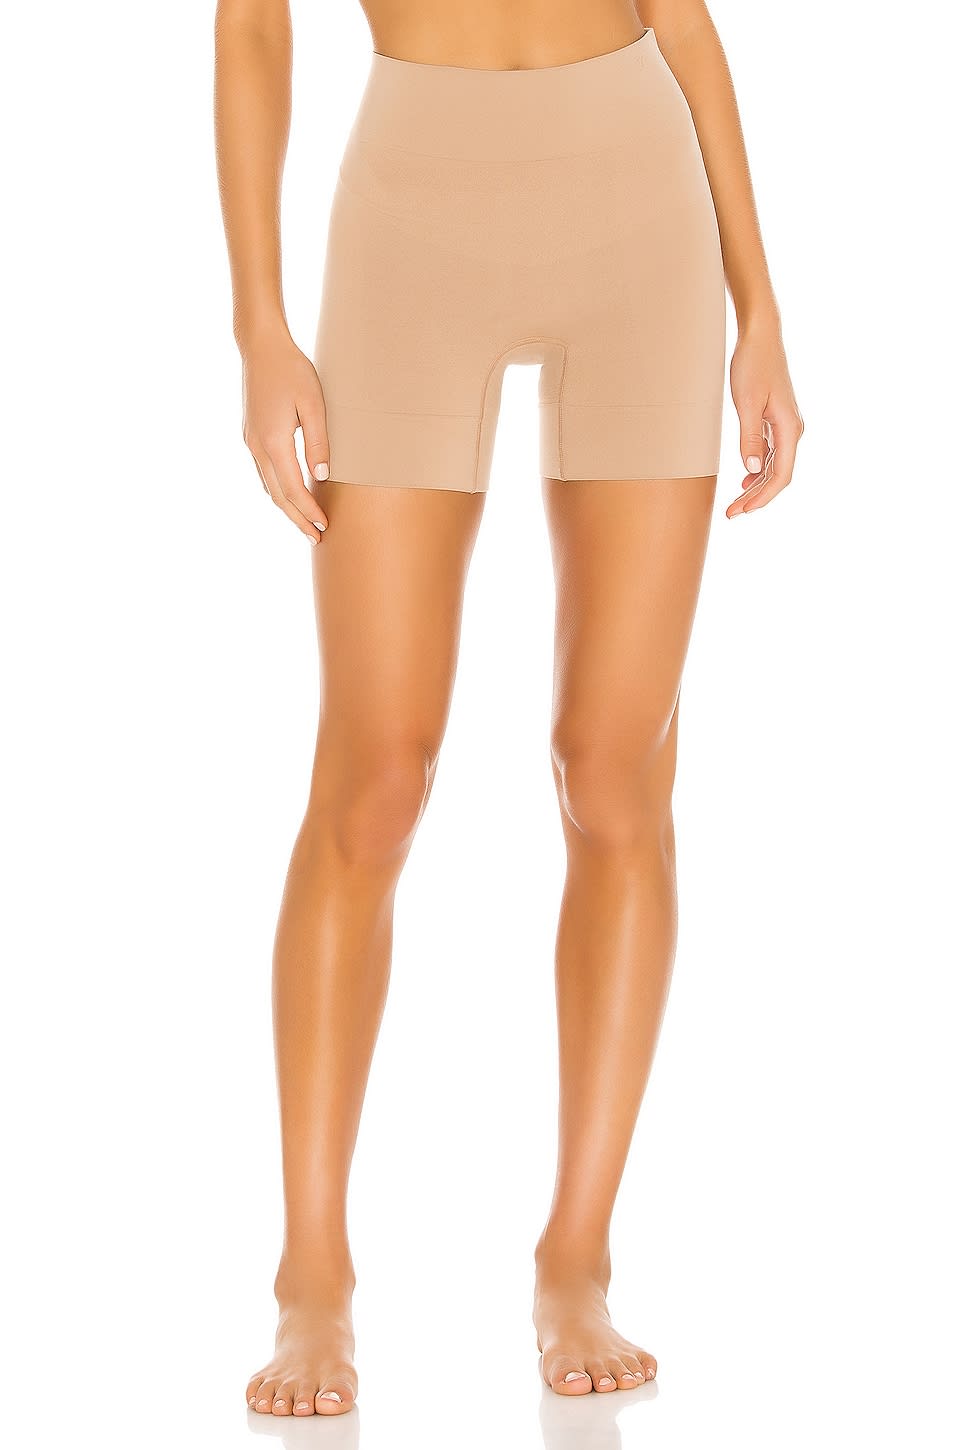 Assets By Spanx Women's Thintuition Hip Slimming Girl Shorts : Target